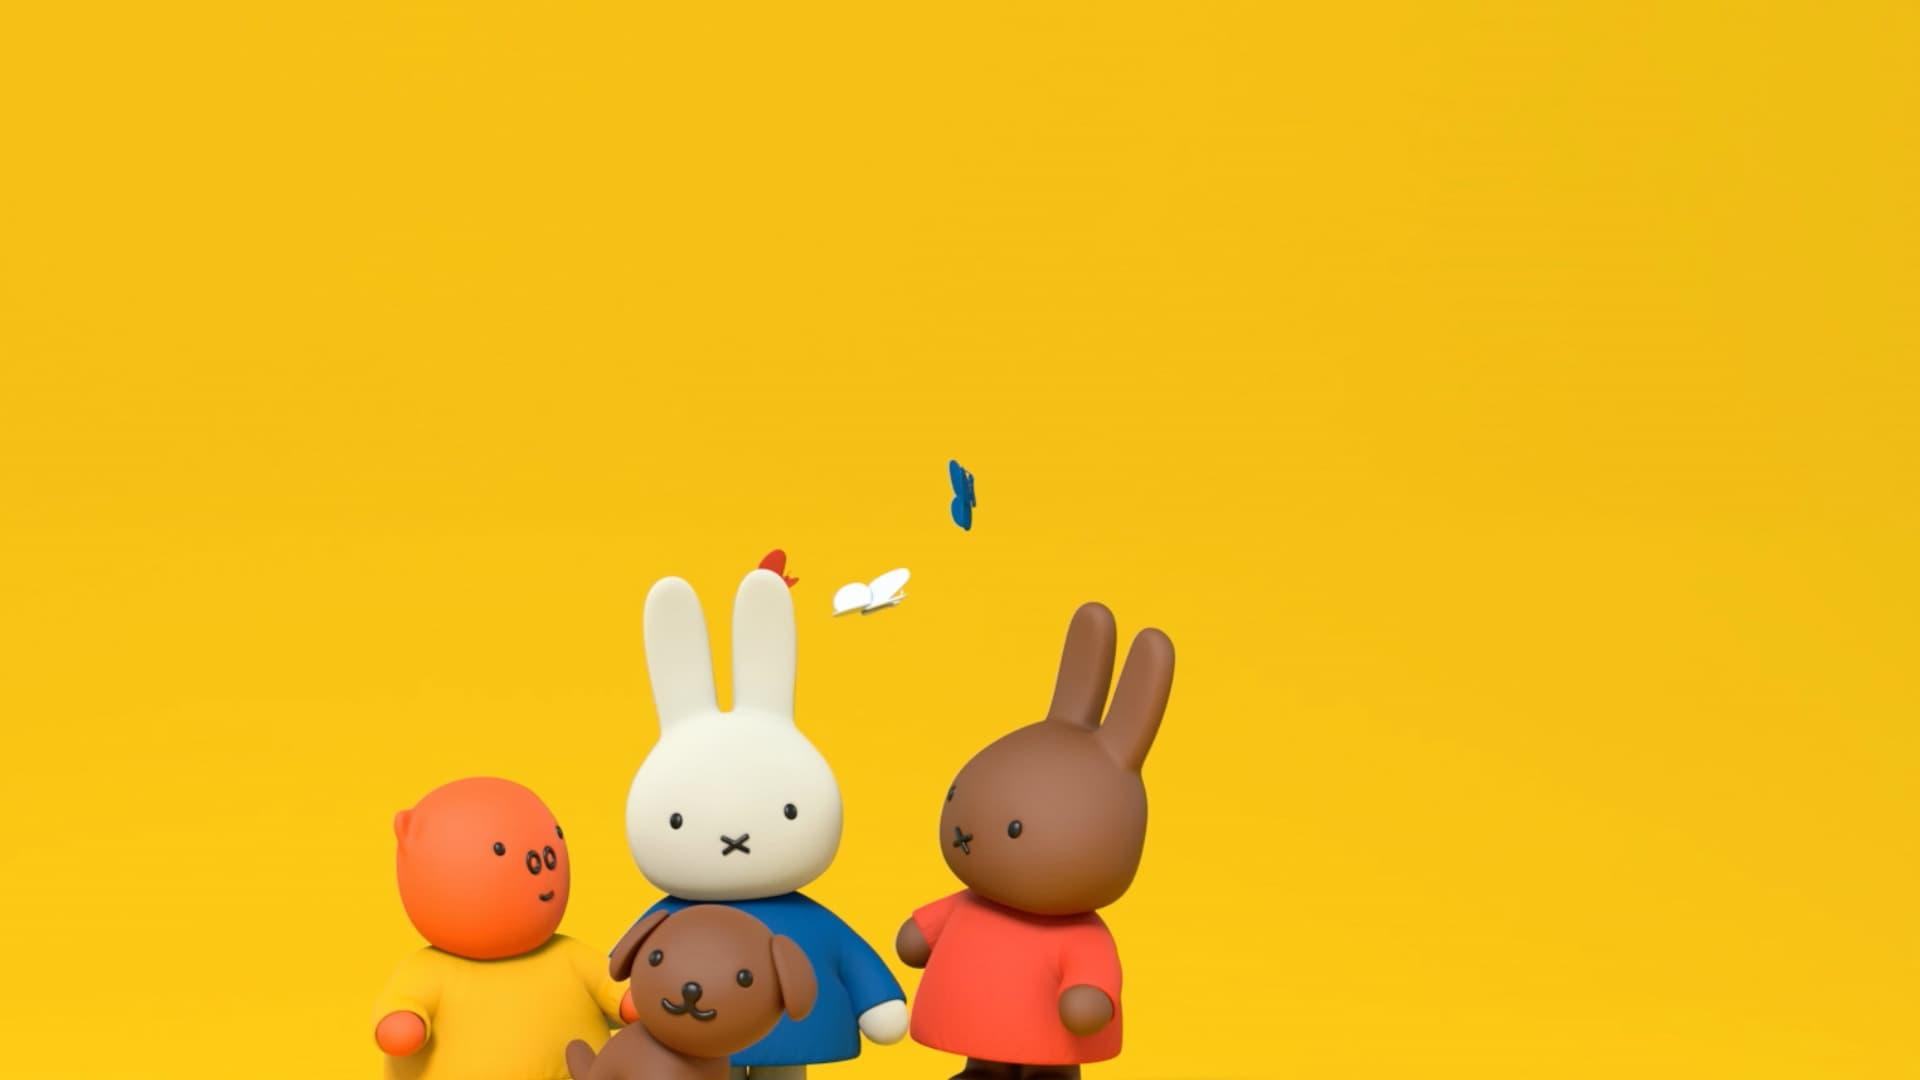 Miffy's Adventures Big and Small backdrop